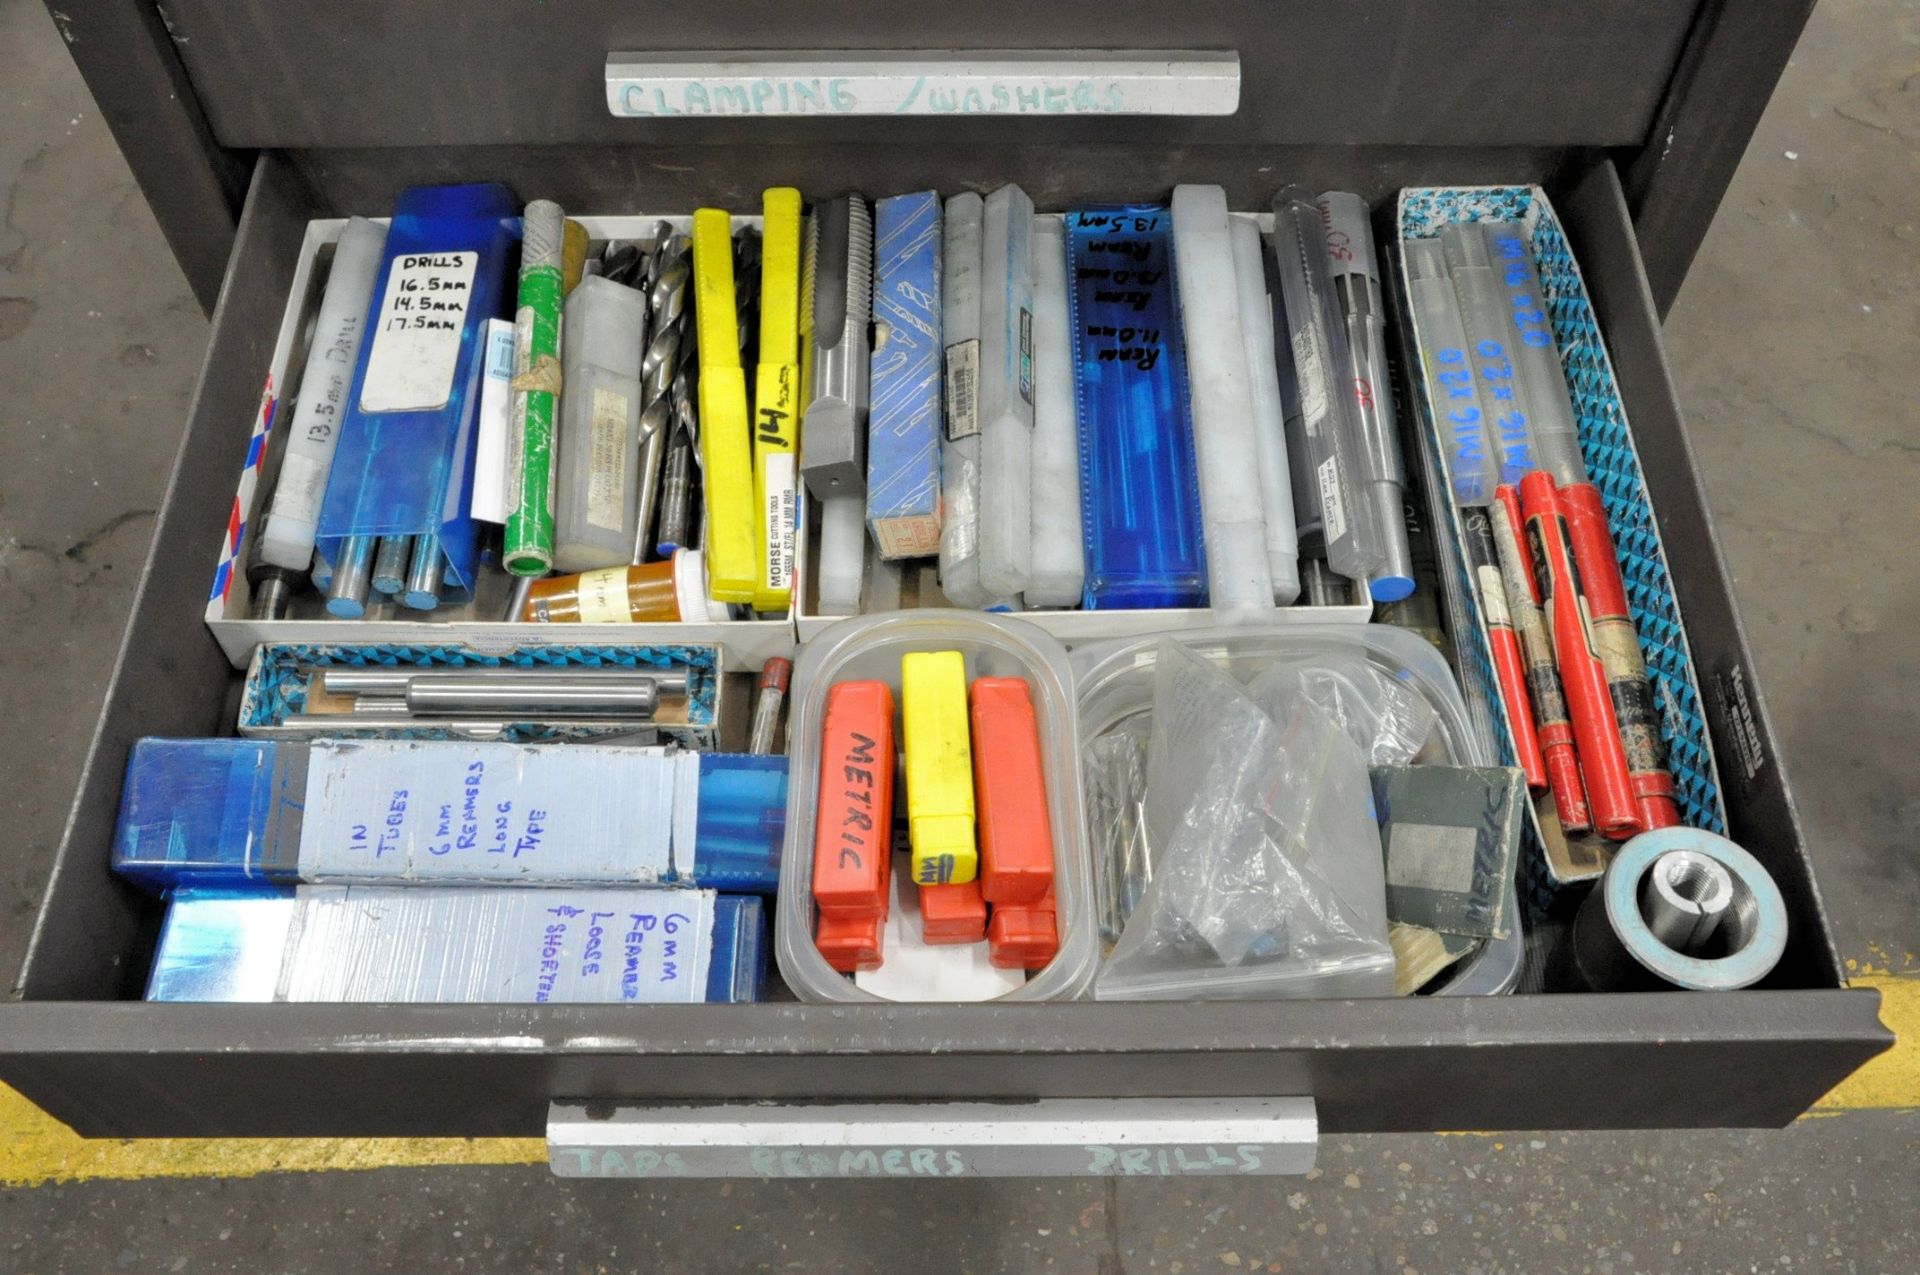 Kennedy 3-Drawer Rolling Tool Box with Asst'd Cutters Contents, (E-7), (Yellow Tag) - Image 3 of 4